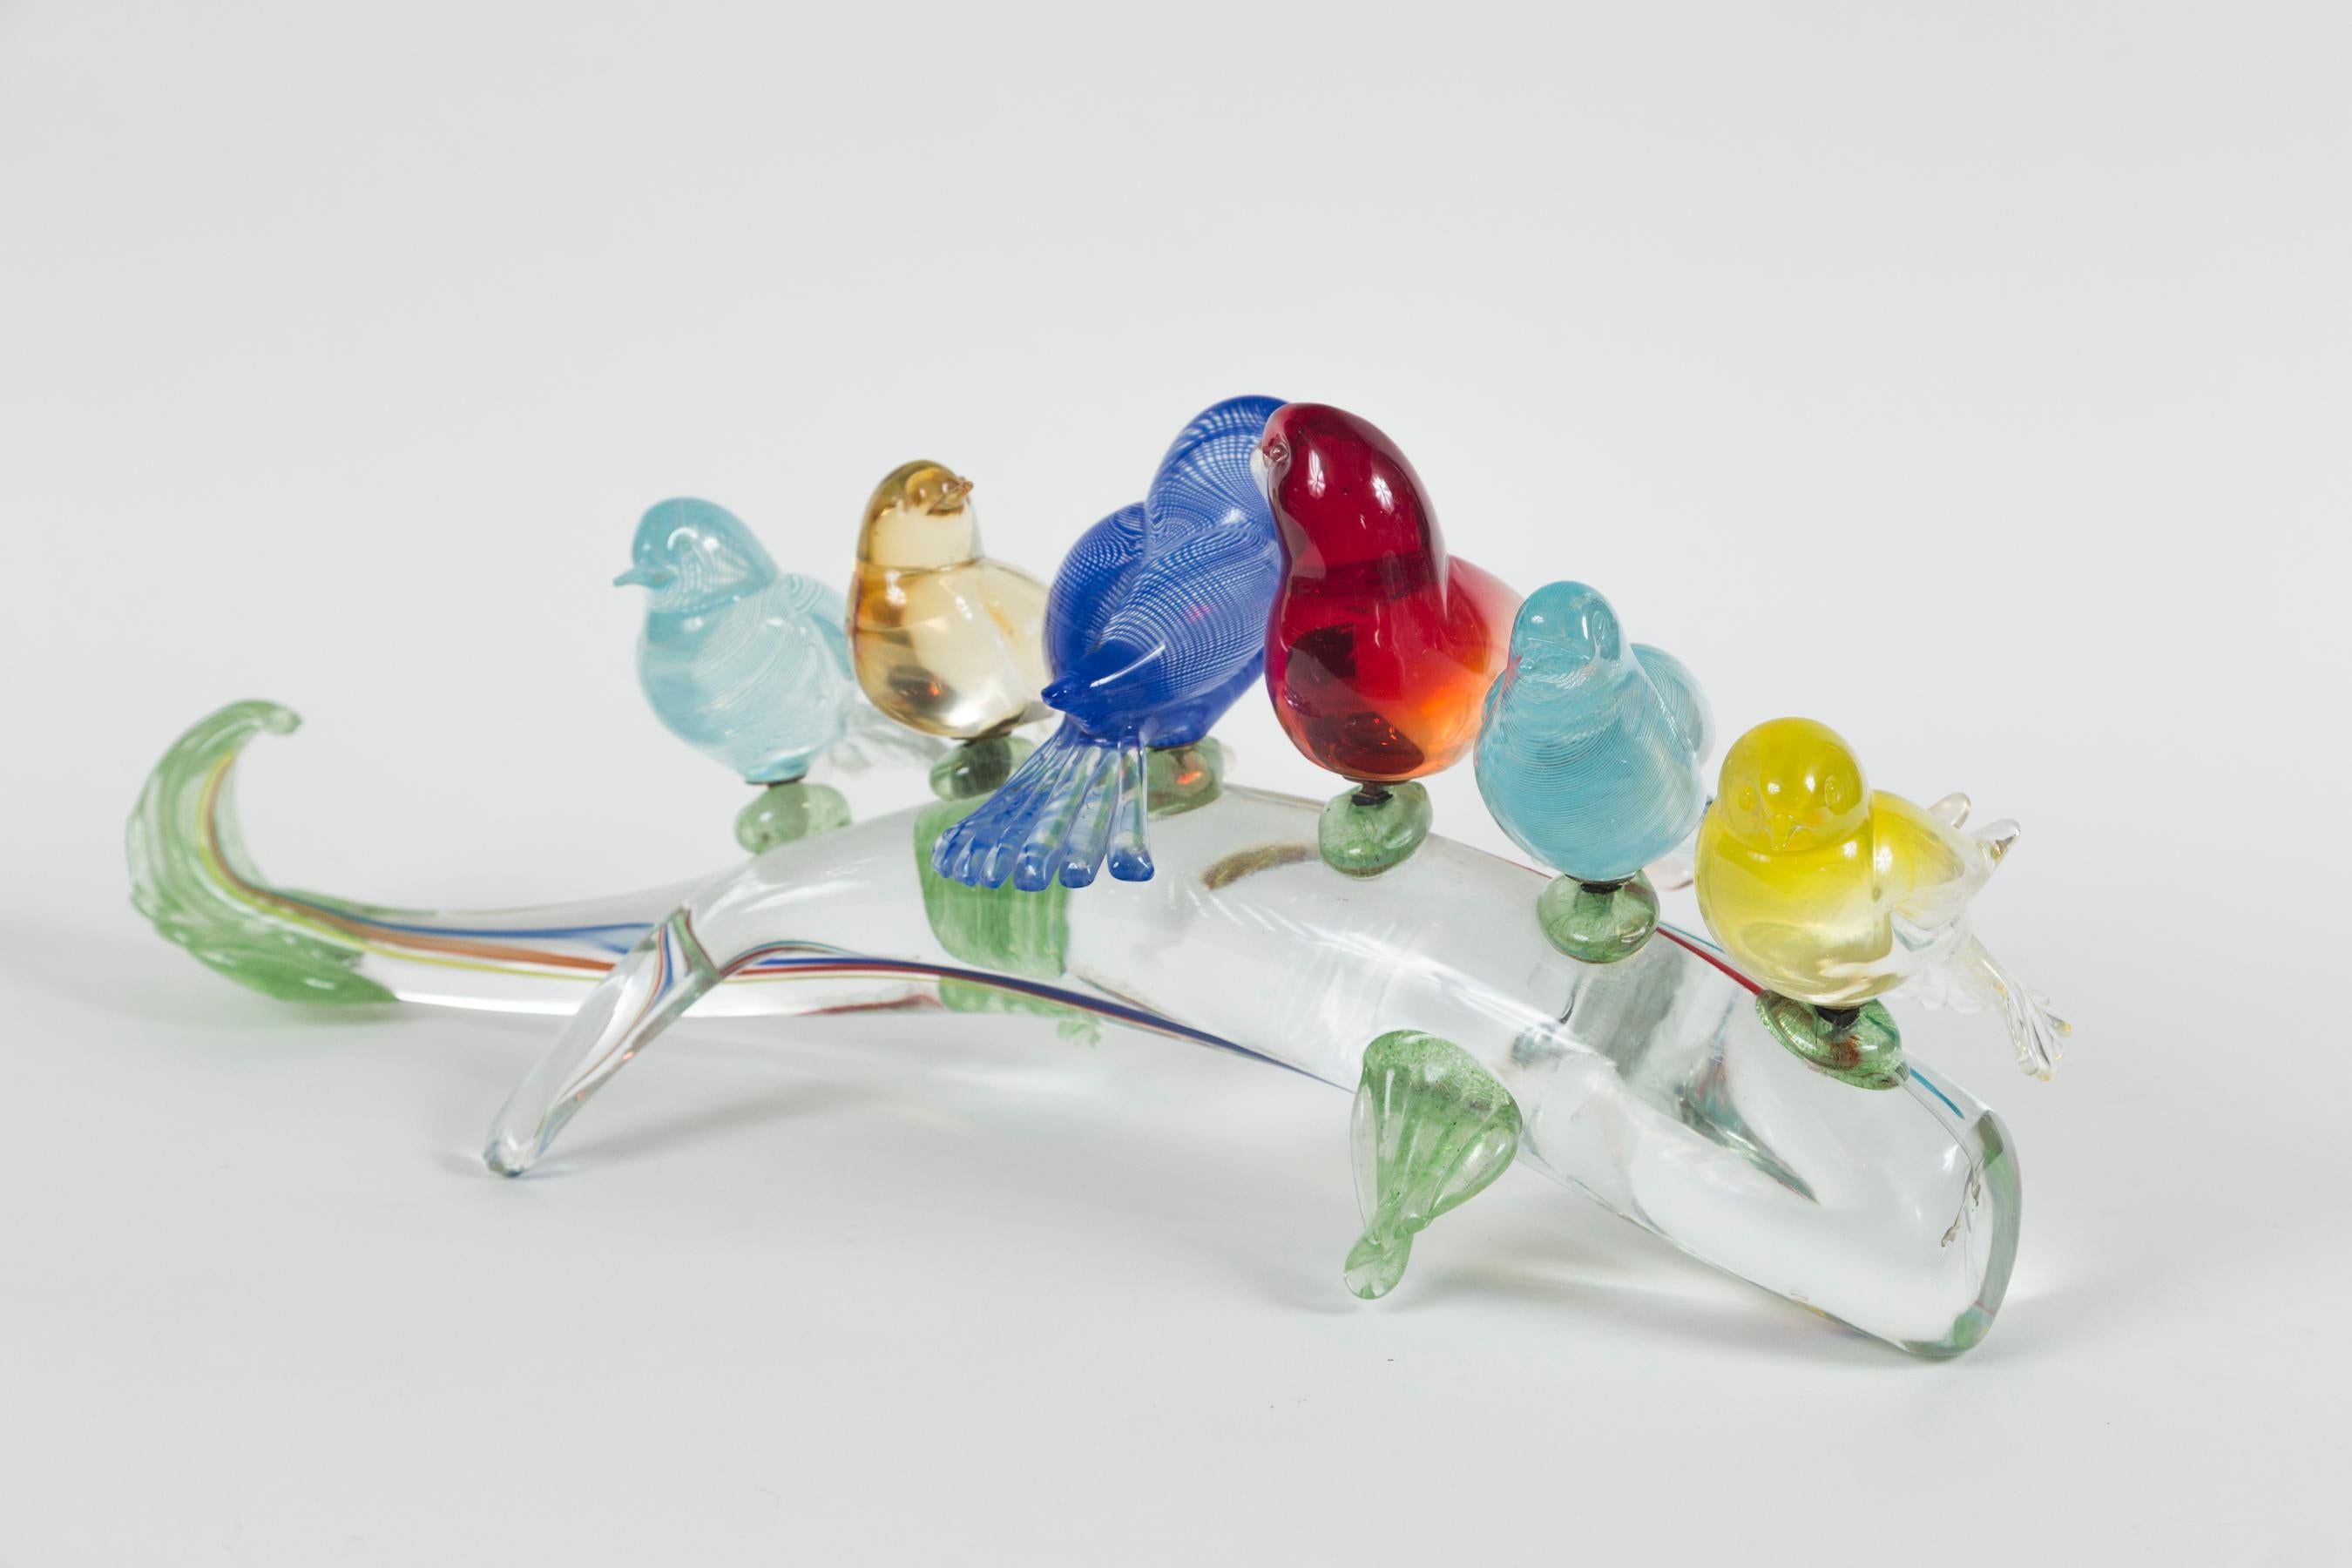 Decorative and playful removable glass birds in which you can place how you wish on a curving branch

Origin: Murano, Italy

Dating: 1960ca

Dimensions: 22? long, 9? deep, 8.25? high.